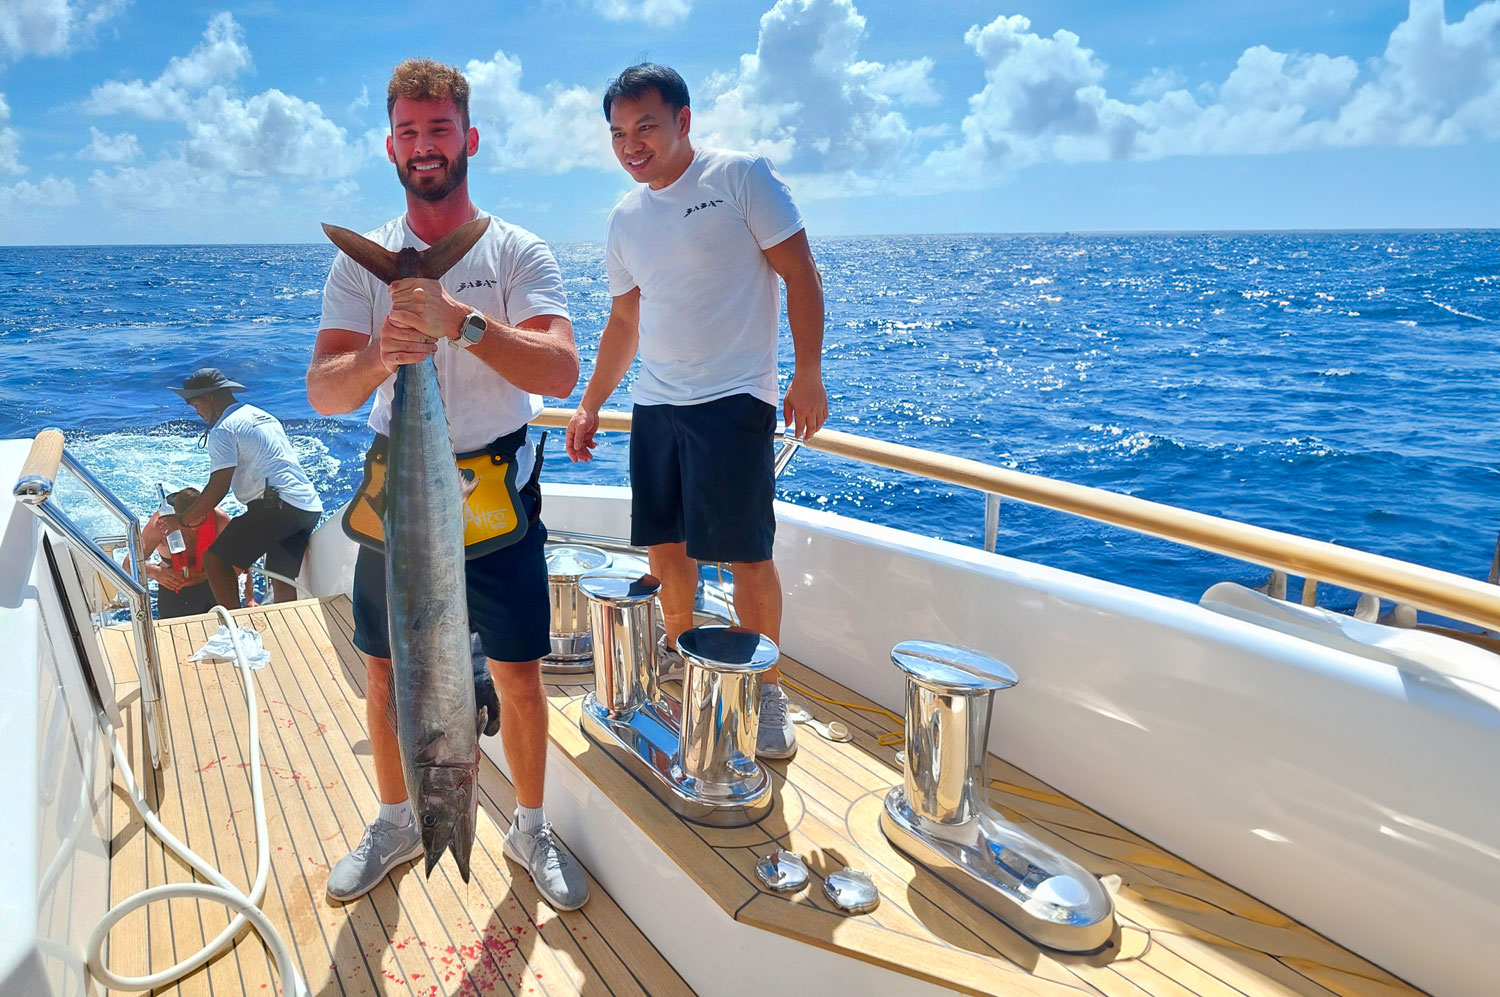 Life and work as a Yacht Chef during a crossing over the Atlantic Ocean